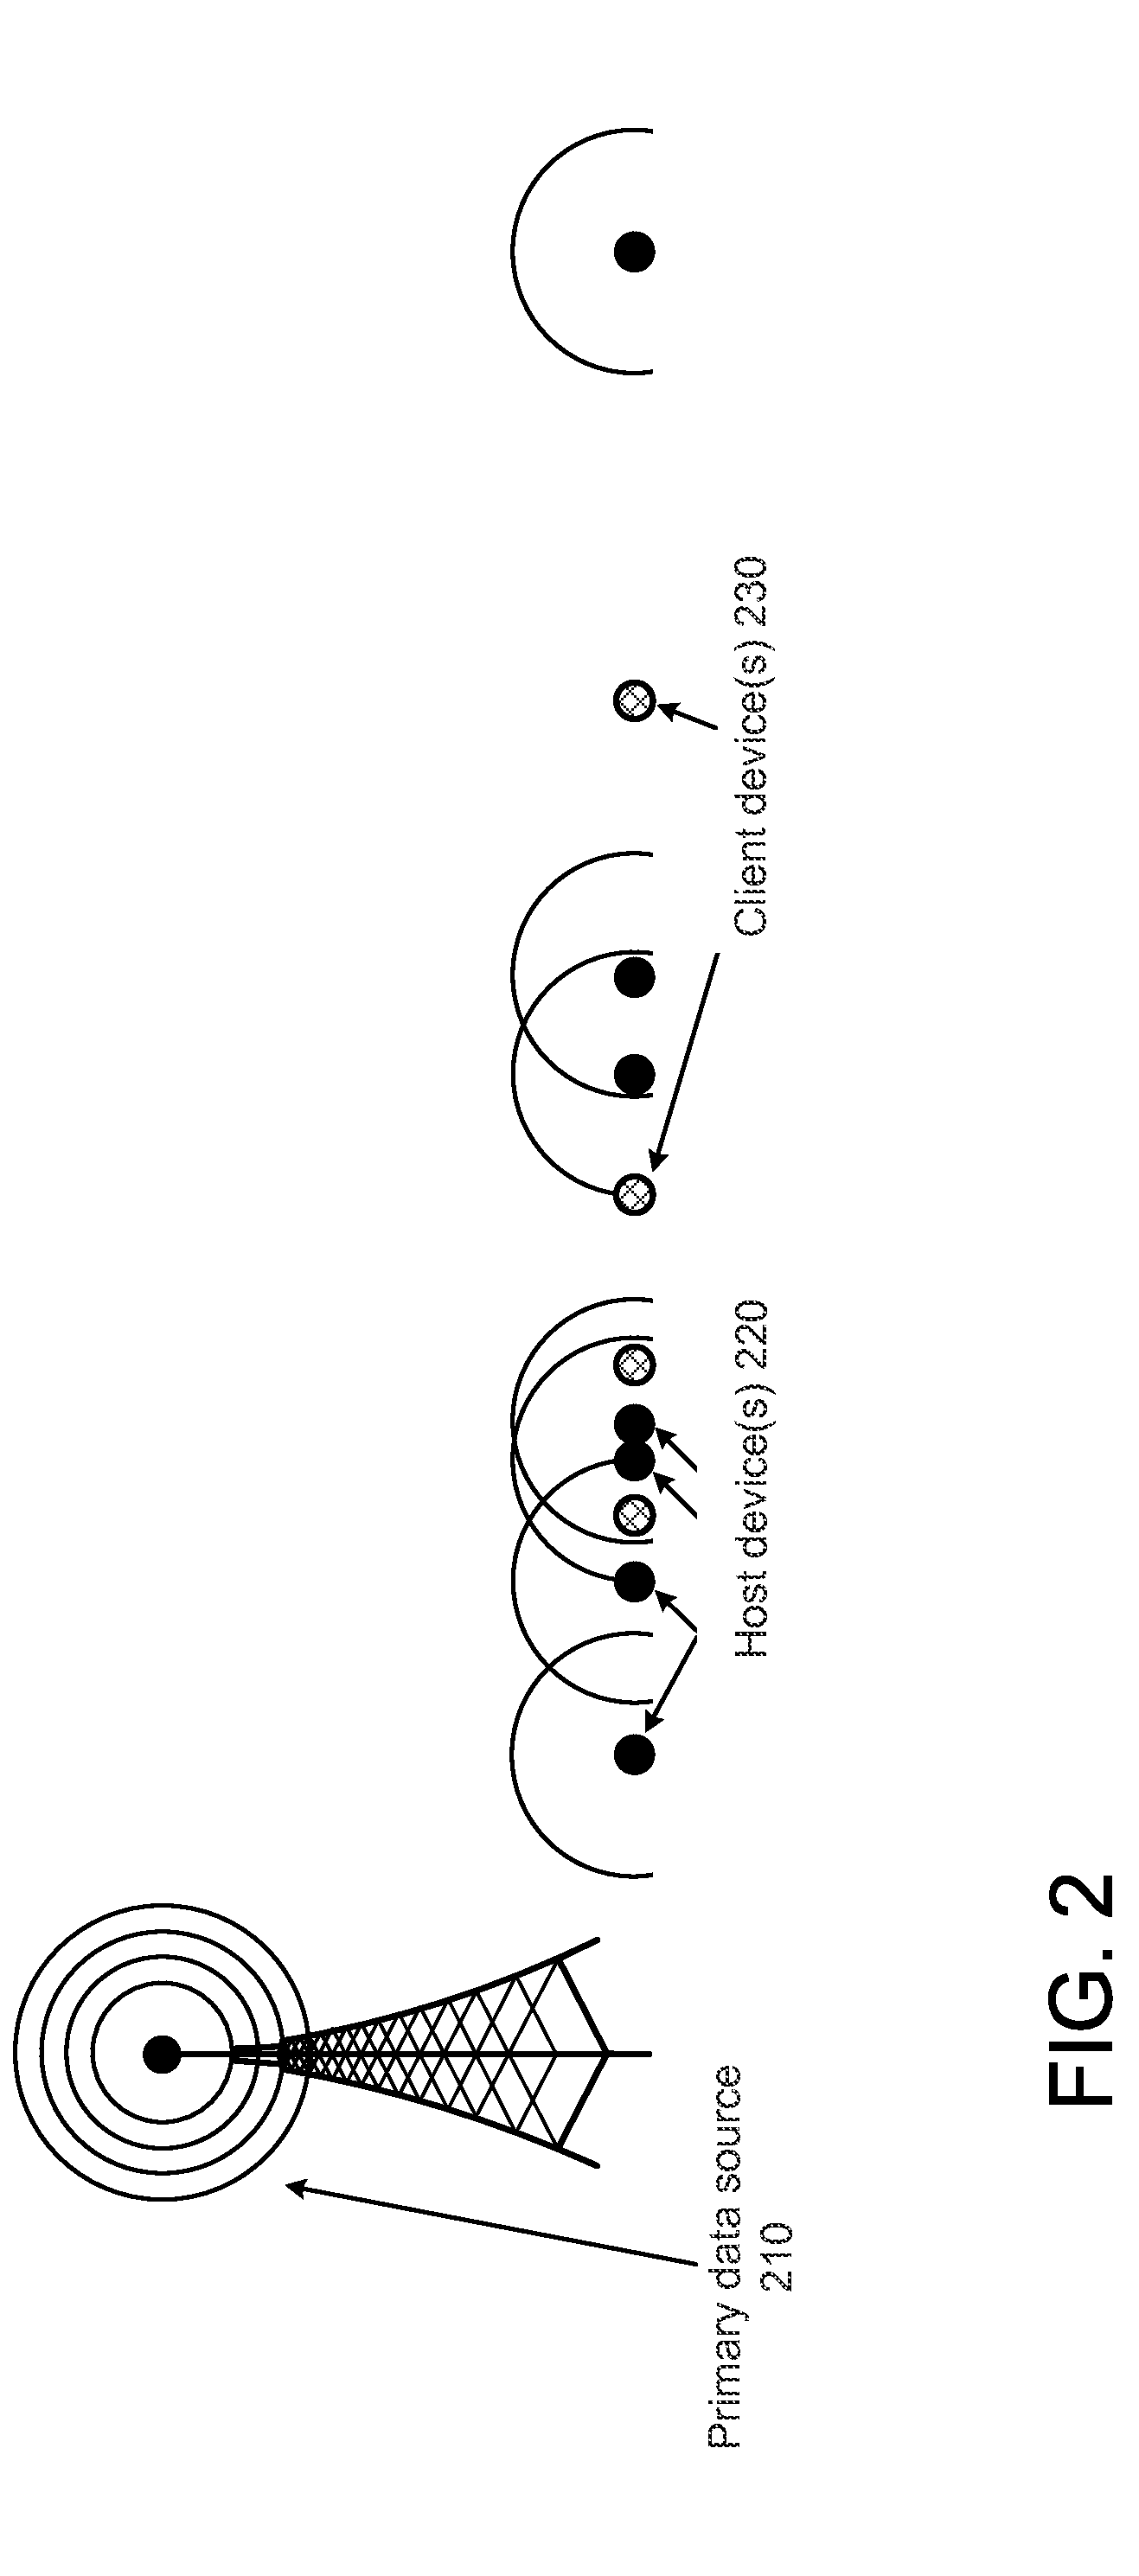 Network bandwidth sharing for small mobile devices